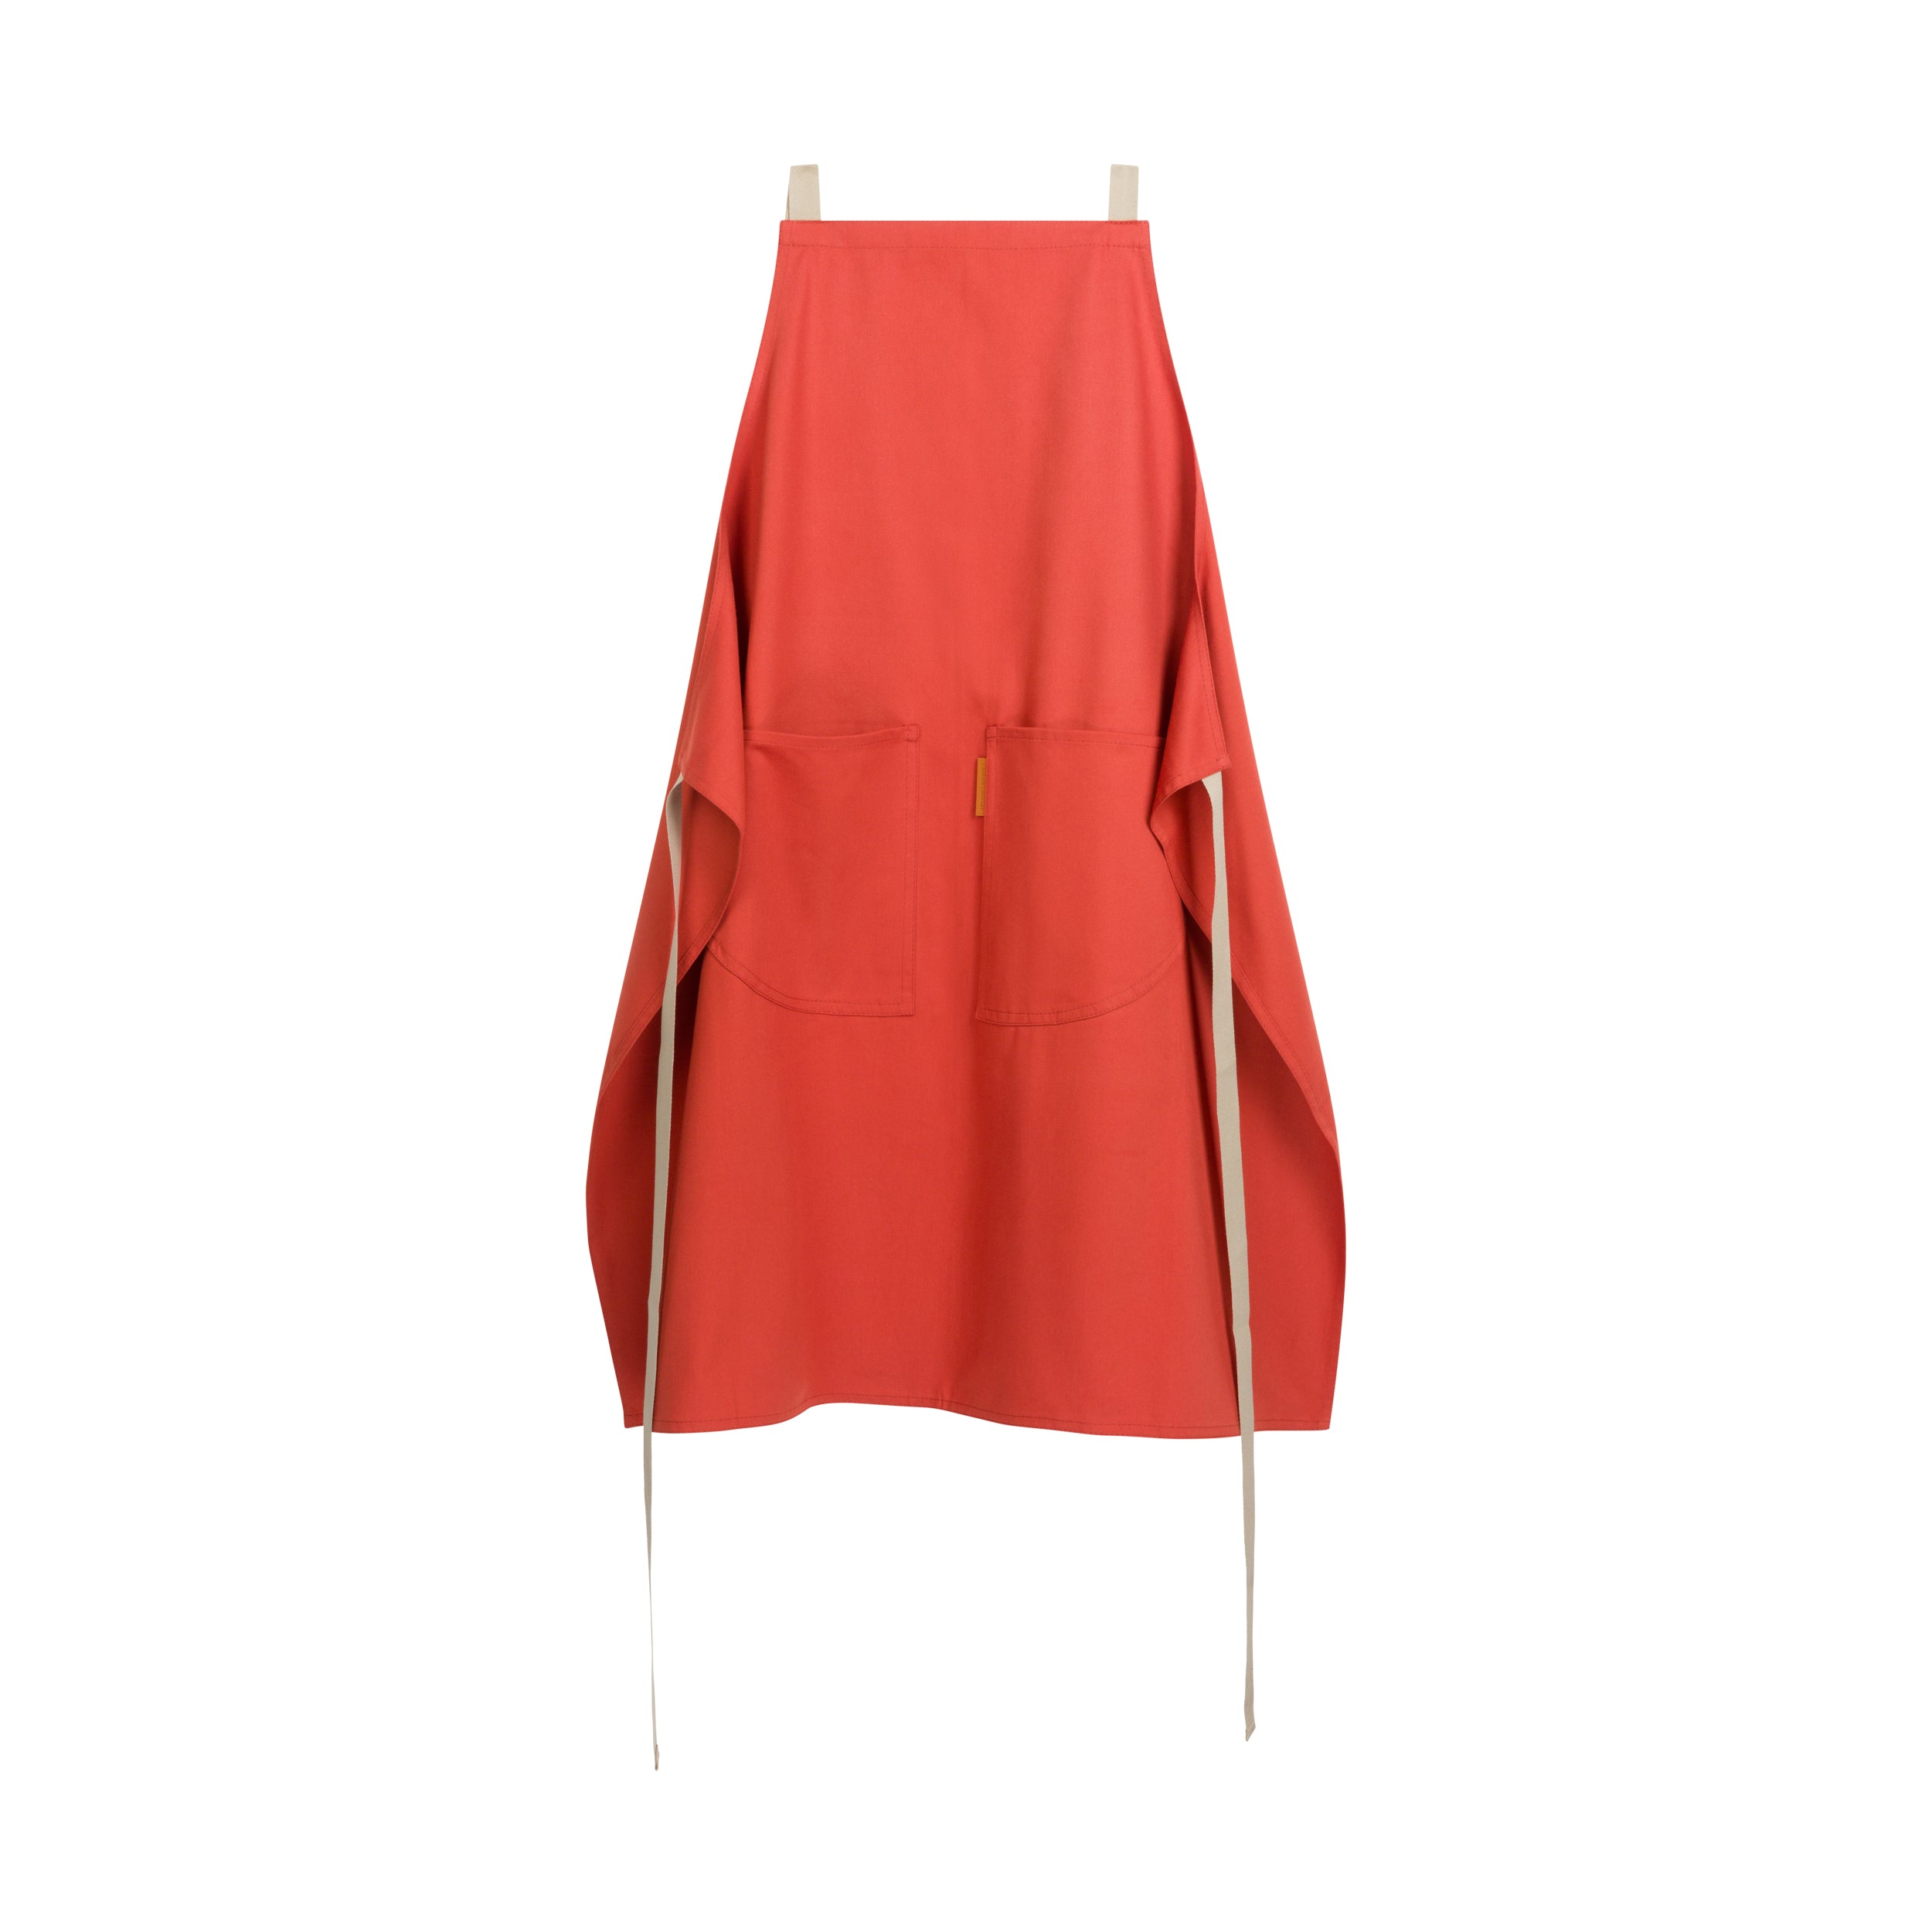 Carrier Company Long Apron in Orange